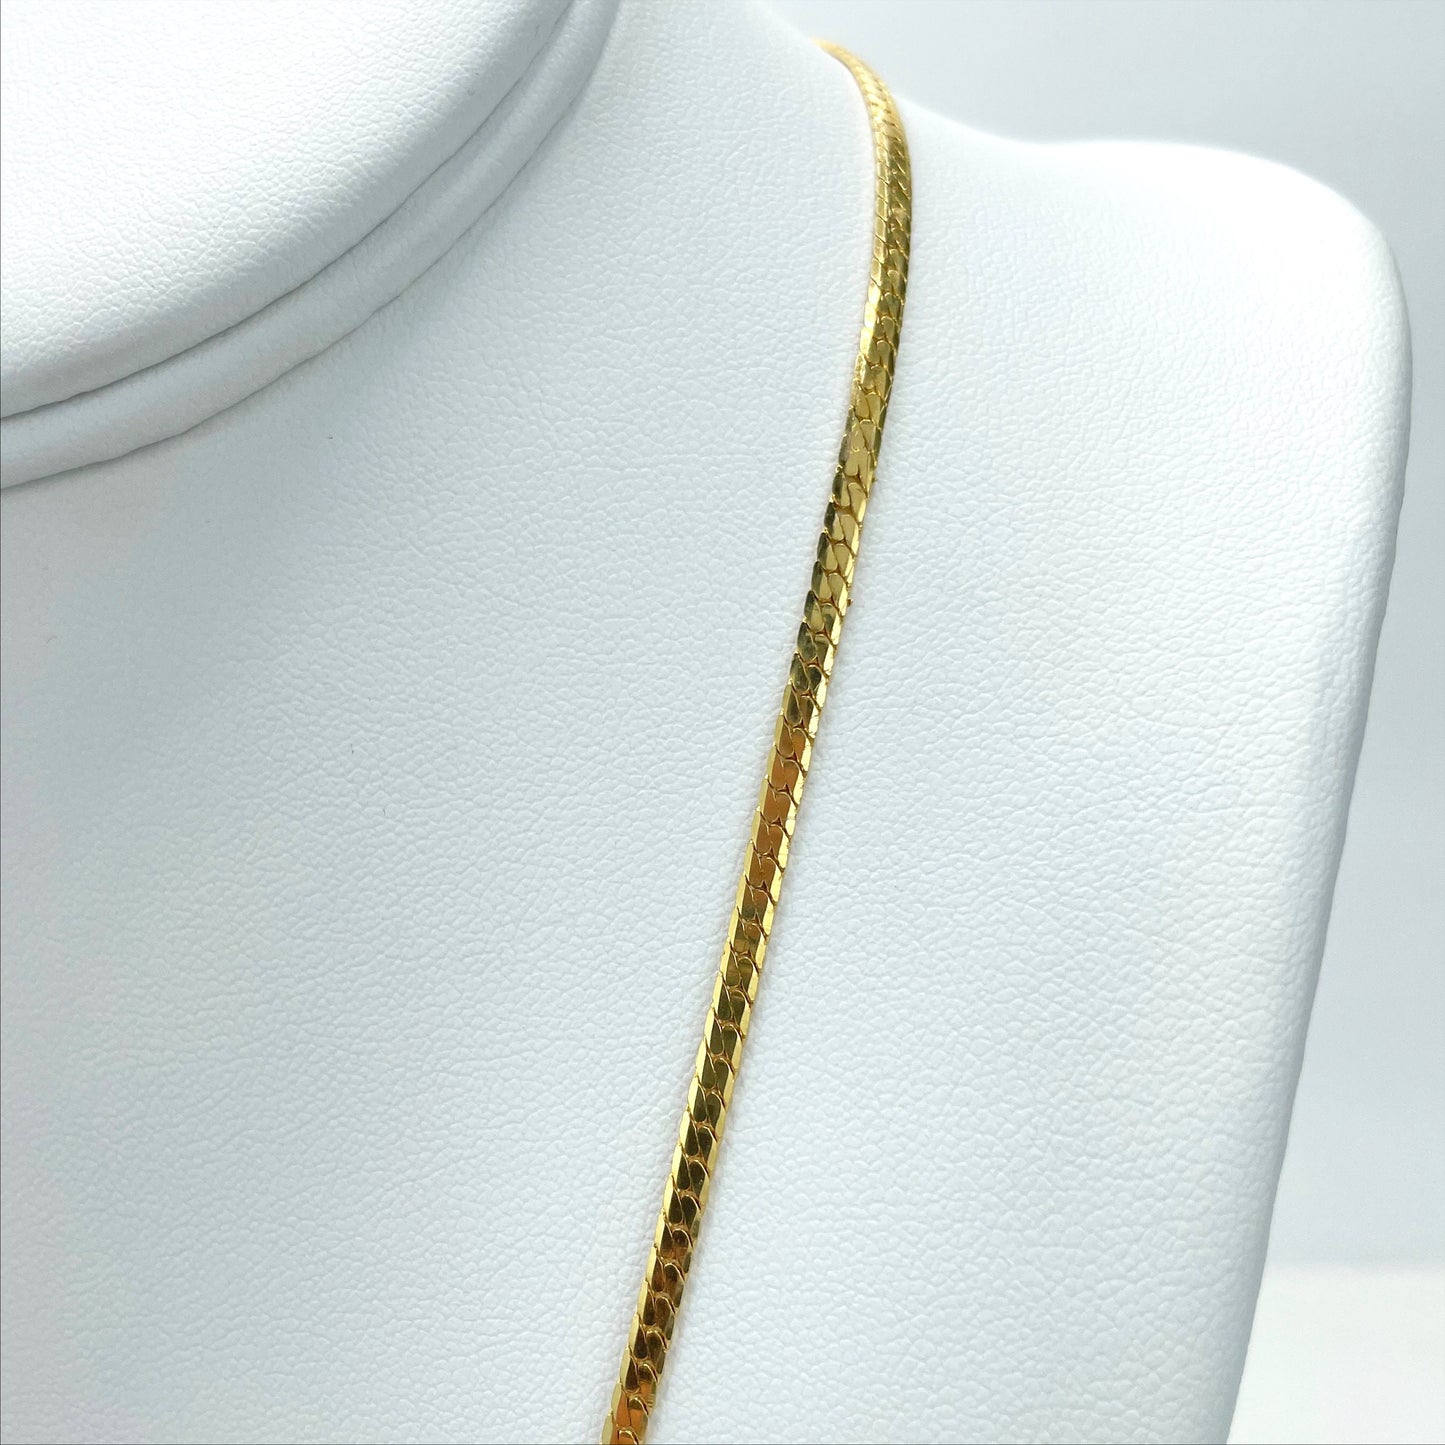 18k Gold Filled 3mm Snake Herringbone Chain, 20 Inches, Lobster Claw, Wholesale Jewelry Making Supplies